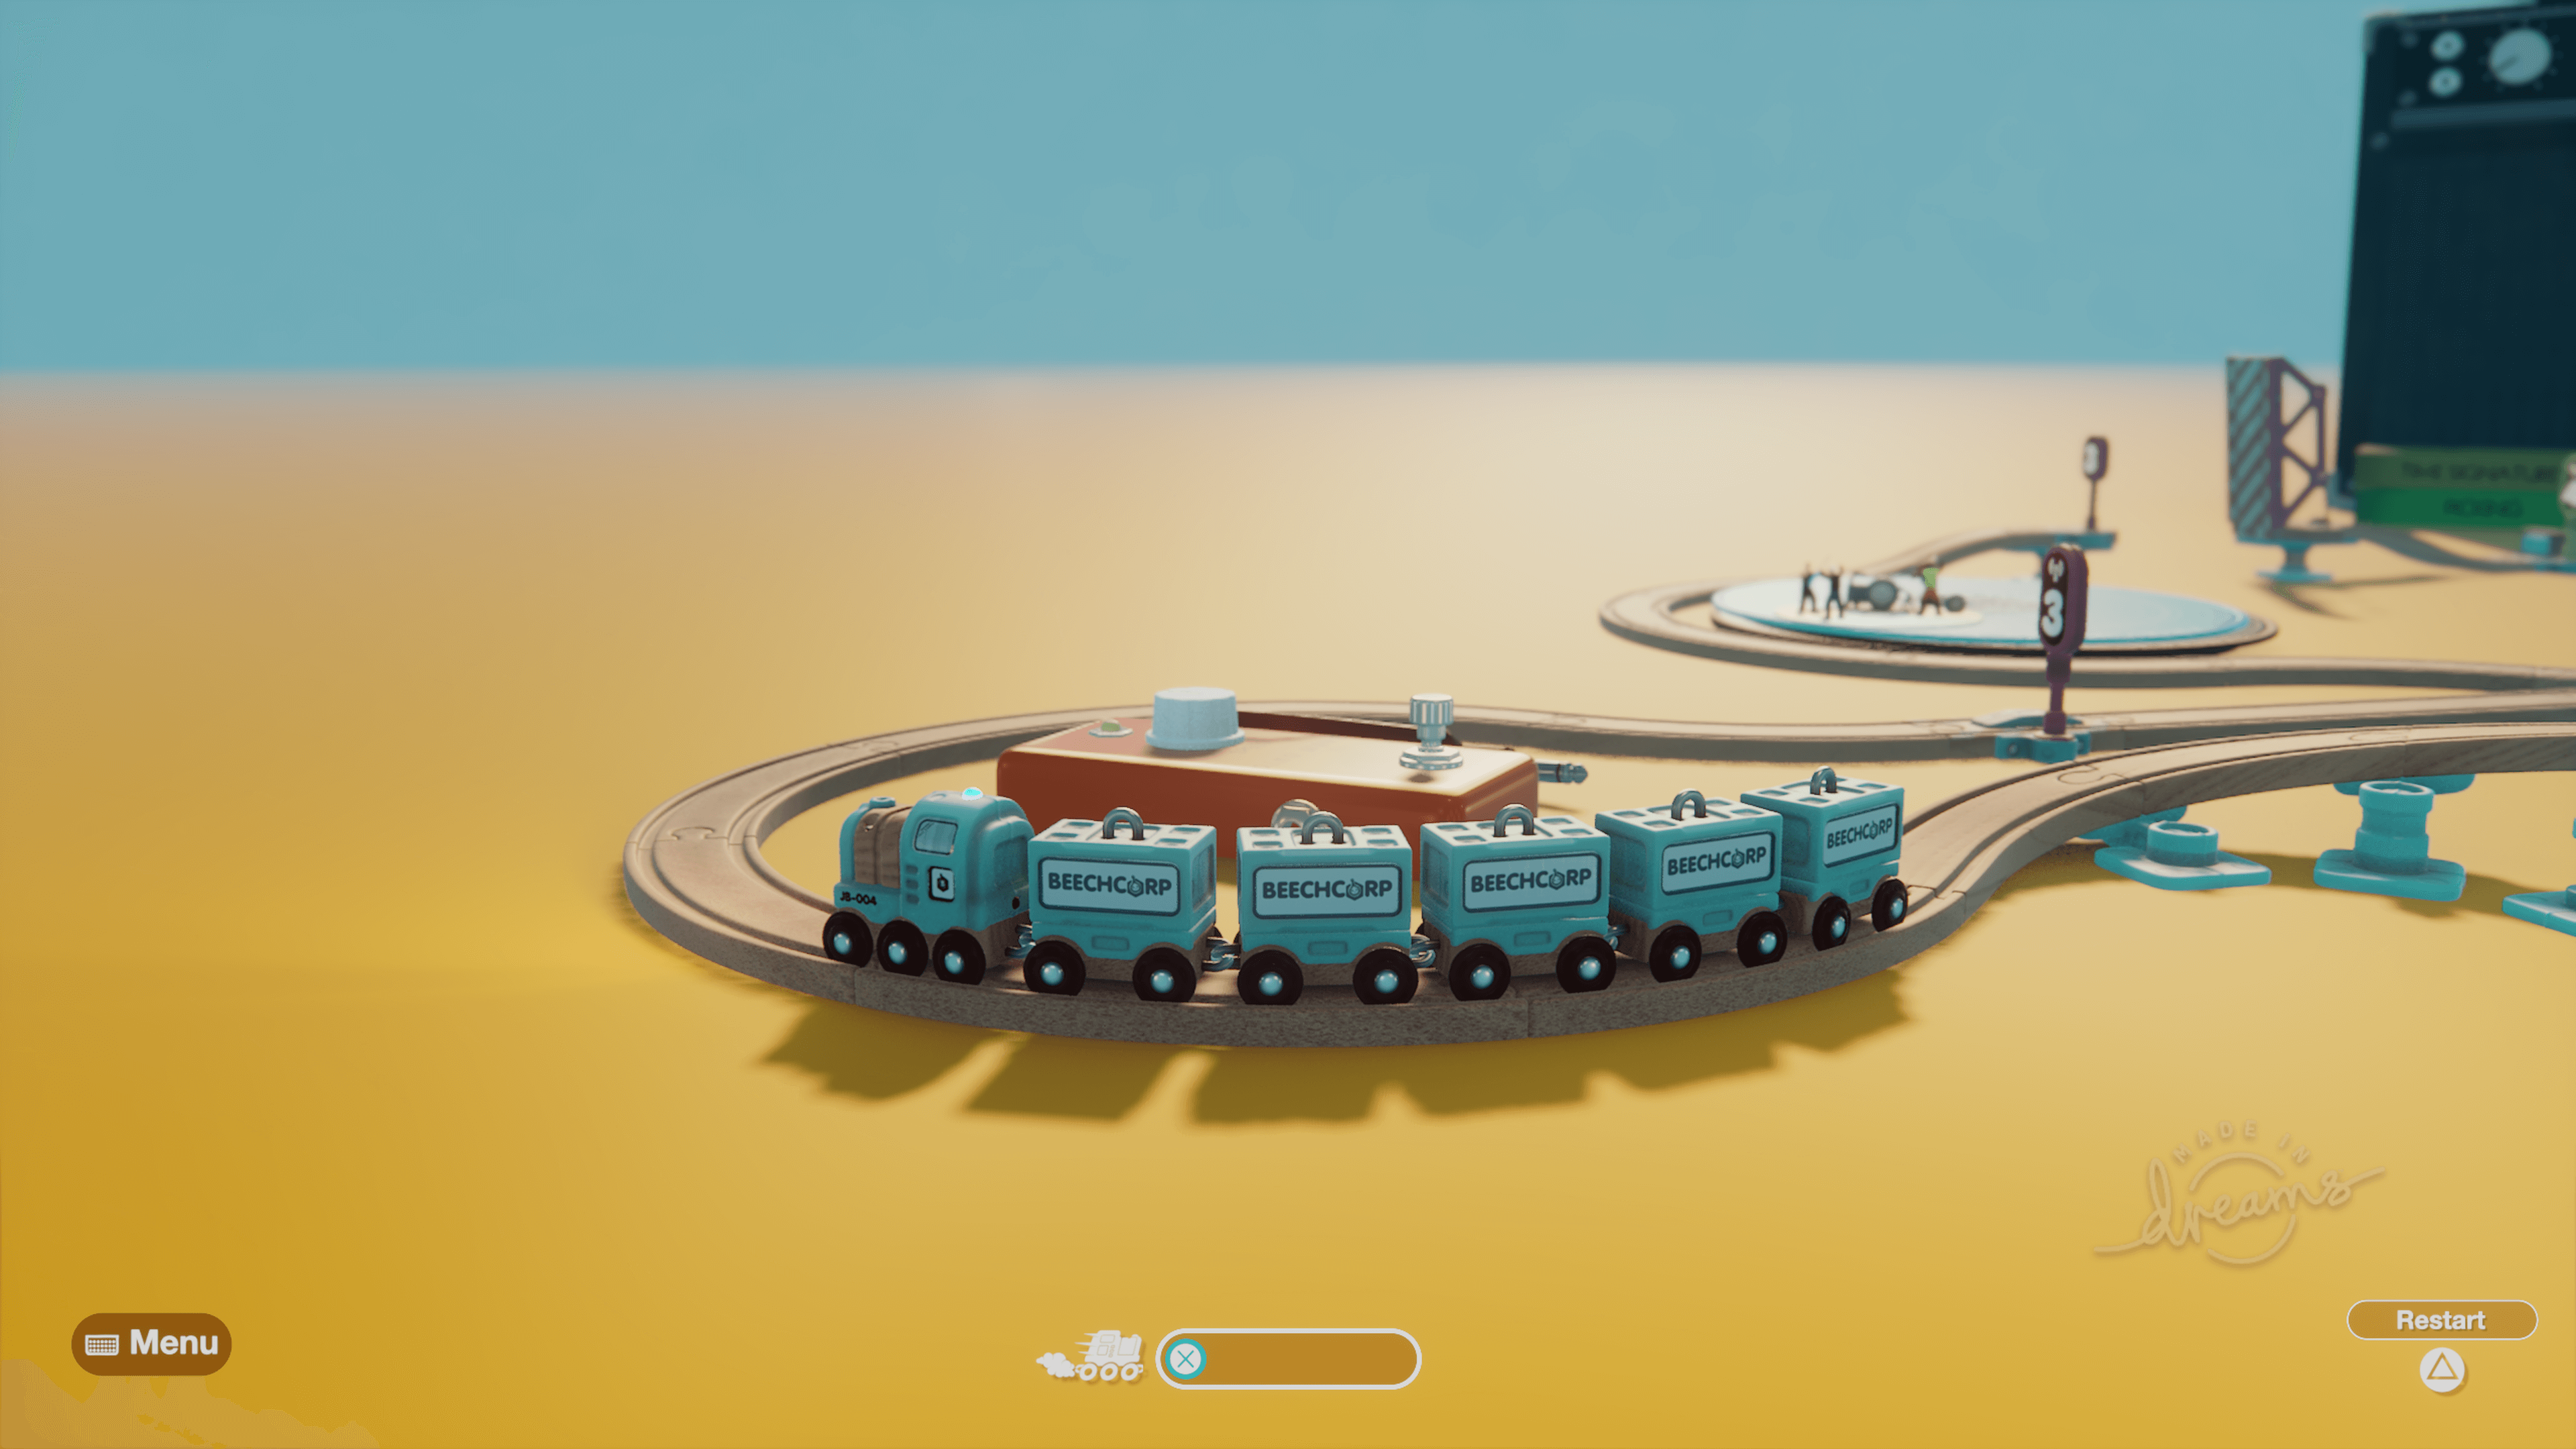 A teal coloured wooden toy train drives around a bend as it pulls 5 carts carrying cargo boxes